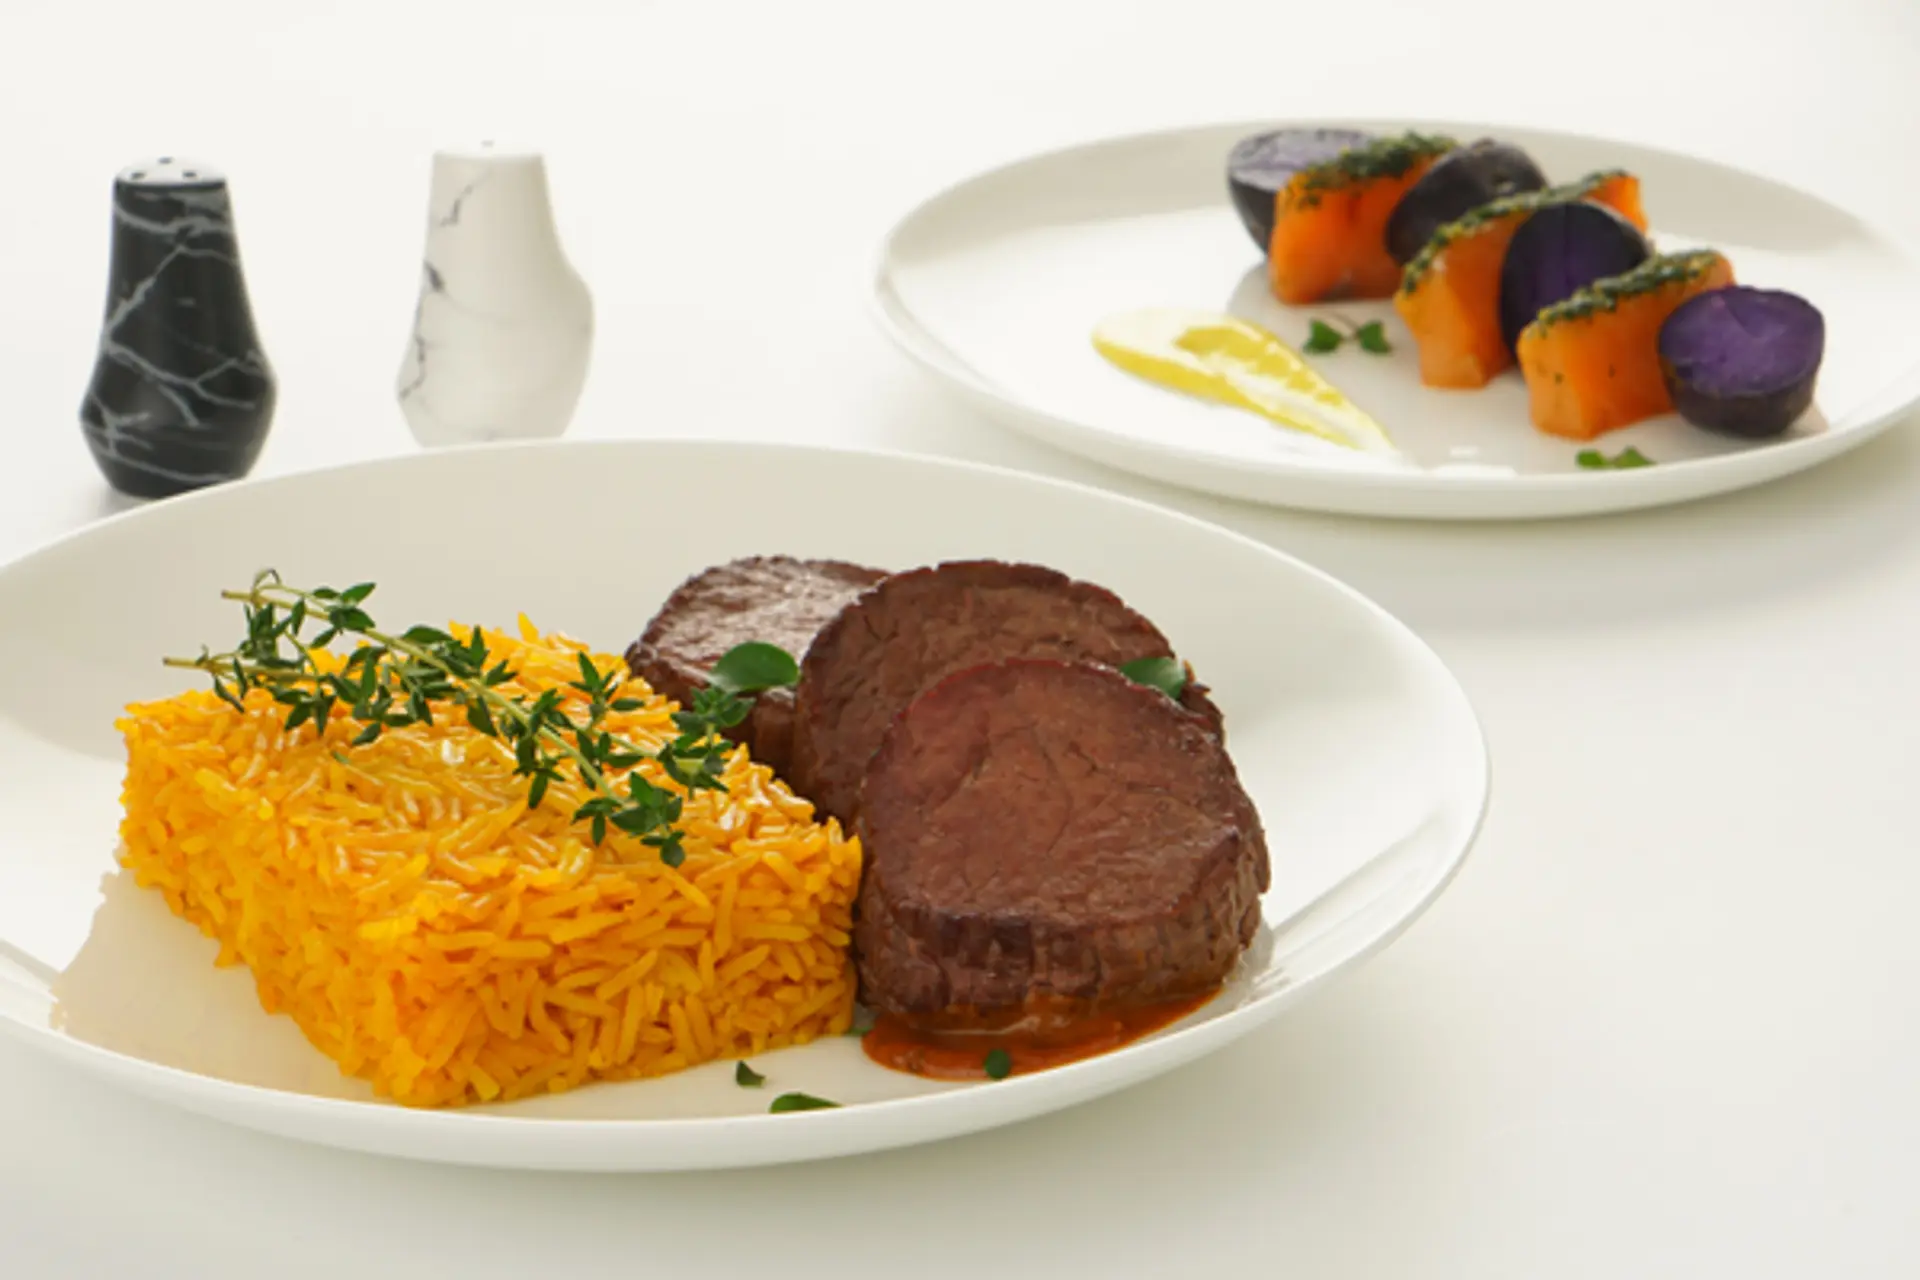 Airlines Articles - Airline Cuisine  - the Best Celebrity Menus and Flying Chefs